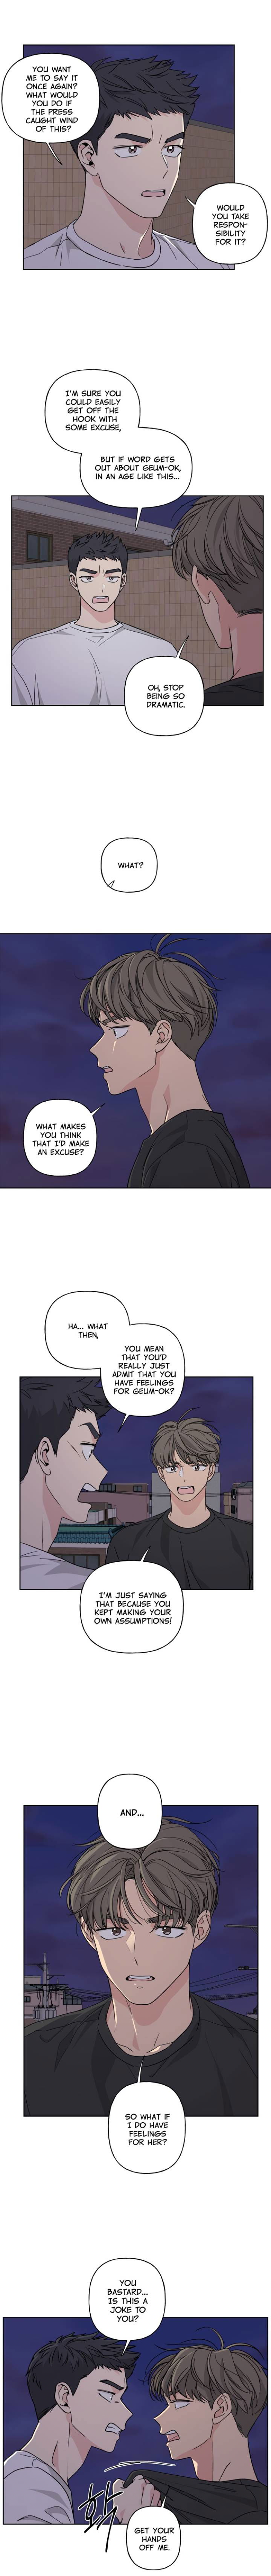 mother-im-sorry-chap-27-9